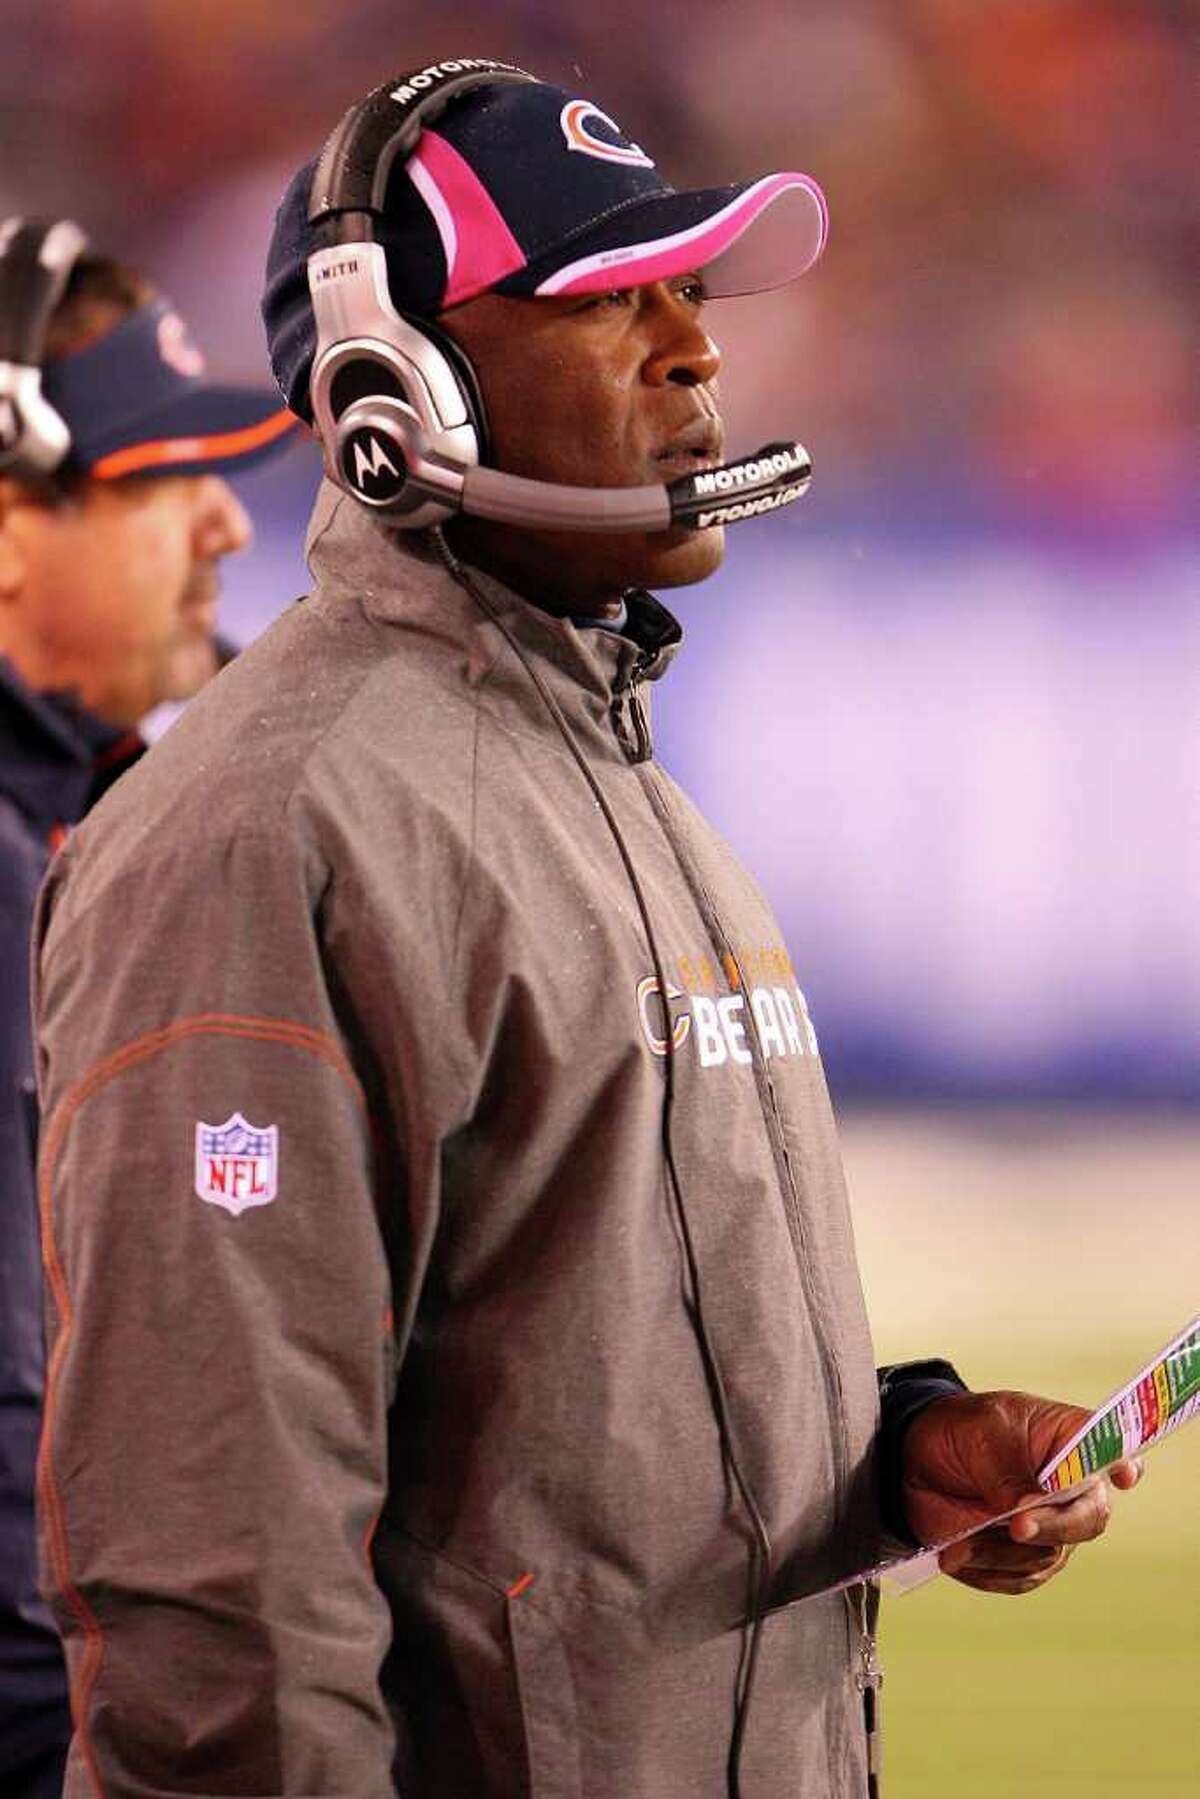 EAST RUTHERFORD, NJ - OCTOBER 03: Head coach Lovie Smith of the Chicago Bears looks on from the sidelines against the New York Giants at New Meadowlands Stadium on October 3, 2010 in East Rutherford, New Jersey. (Photo by Andrew Burton/Getty Images) *** Local Caption *** Lovie Smith